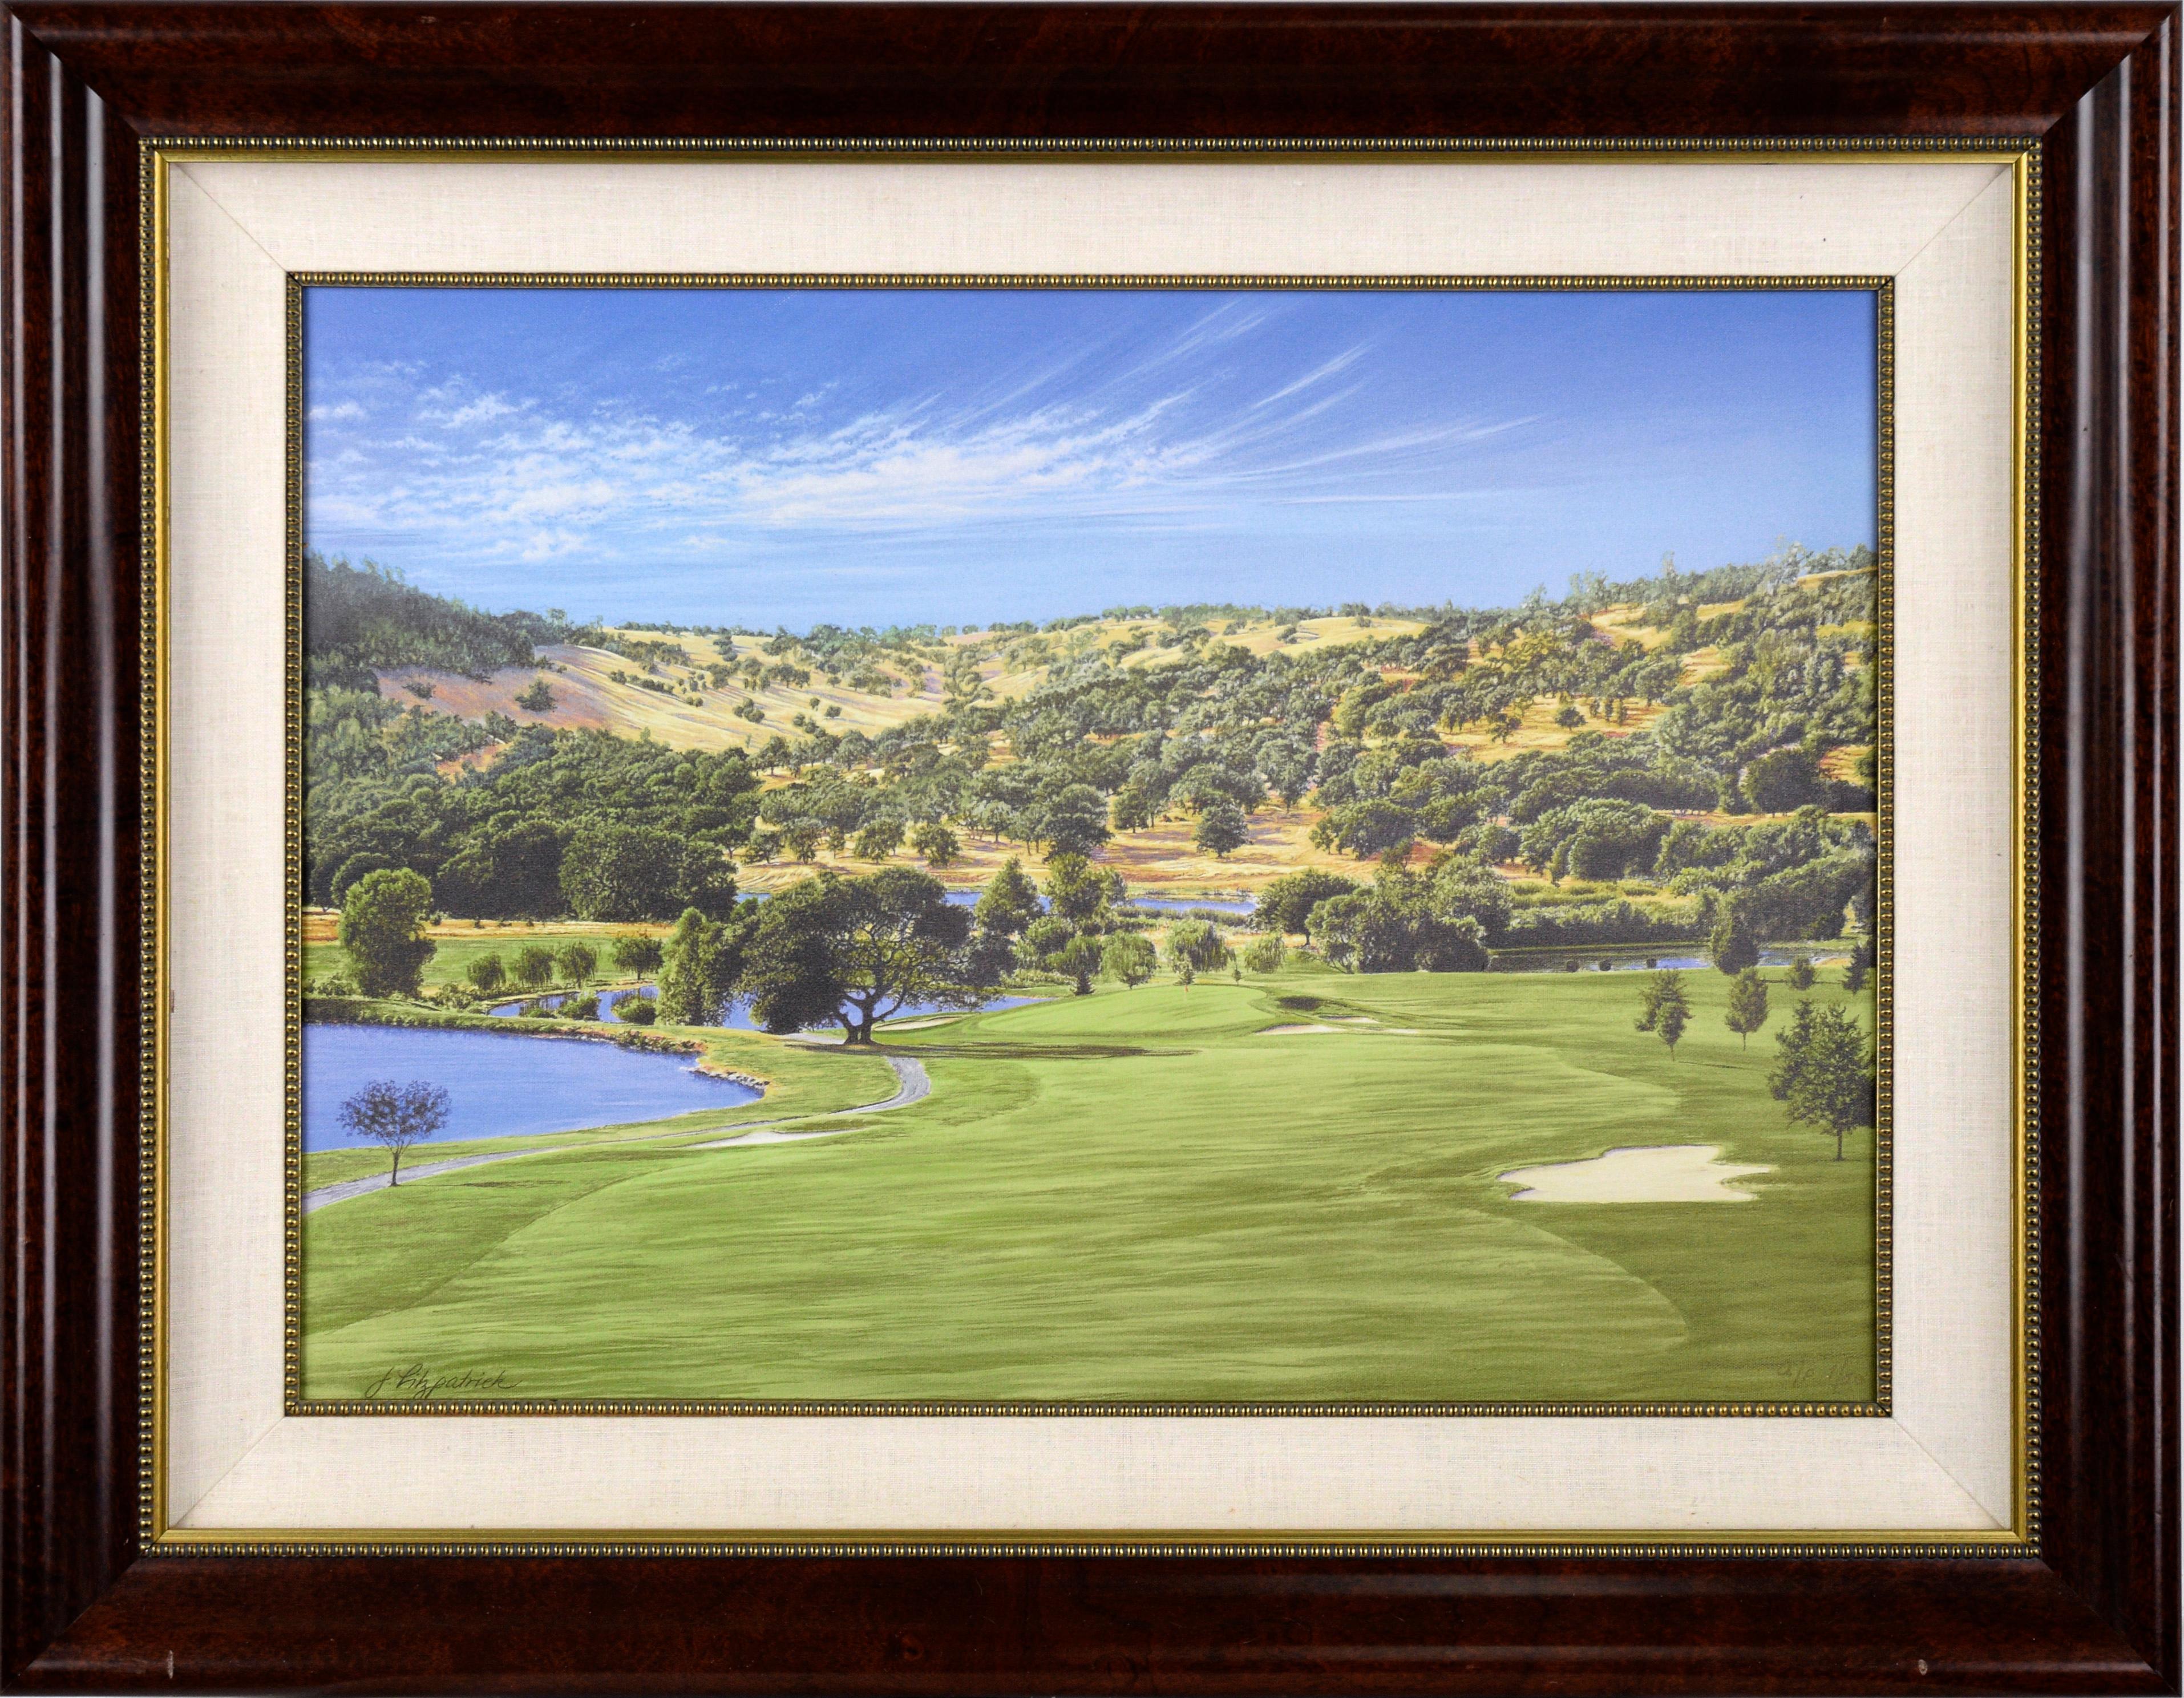 Jim Fitzpatrick Landscape Print - The Tenth Hole at Auburn Valley Golf Course - AP, 1/50 - Giclee on Canvas